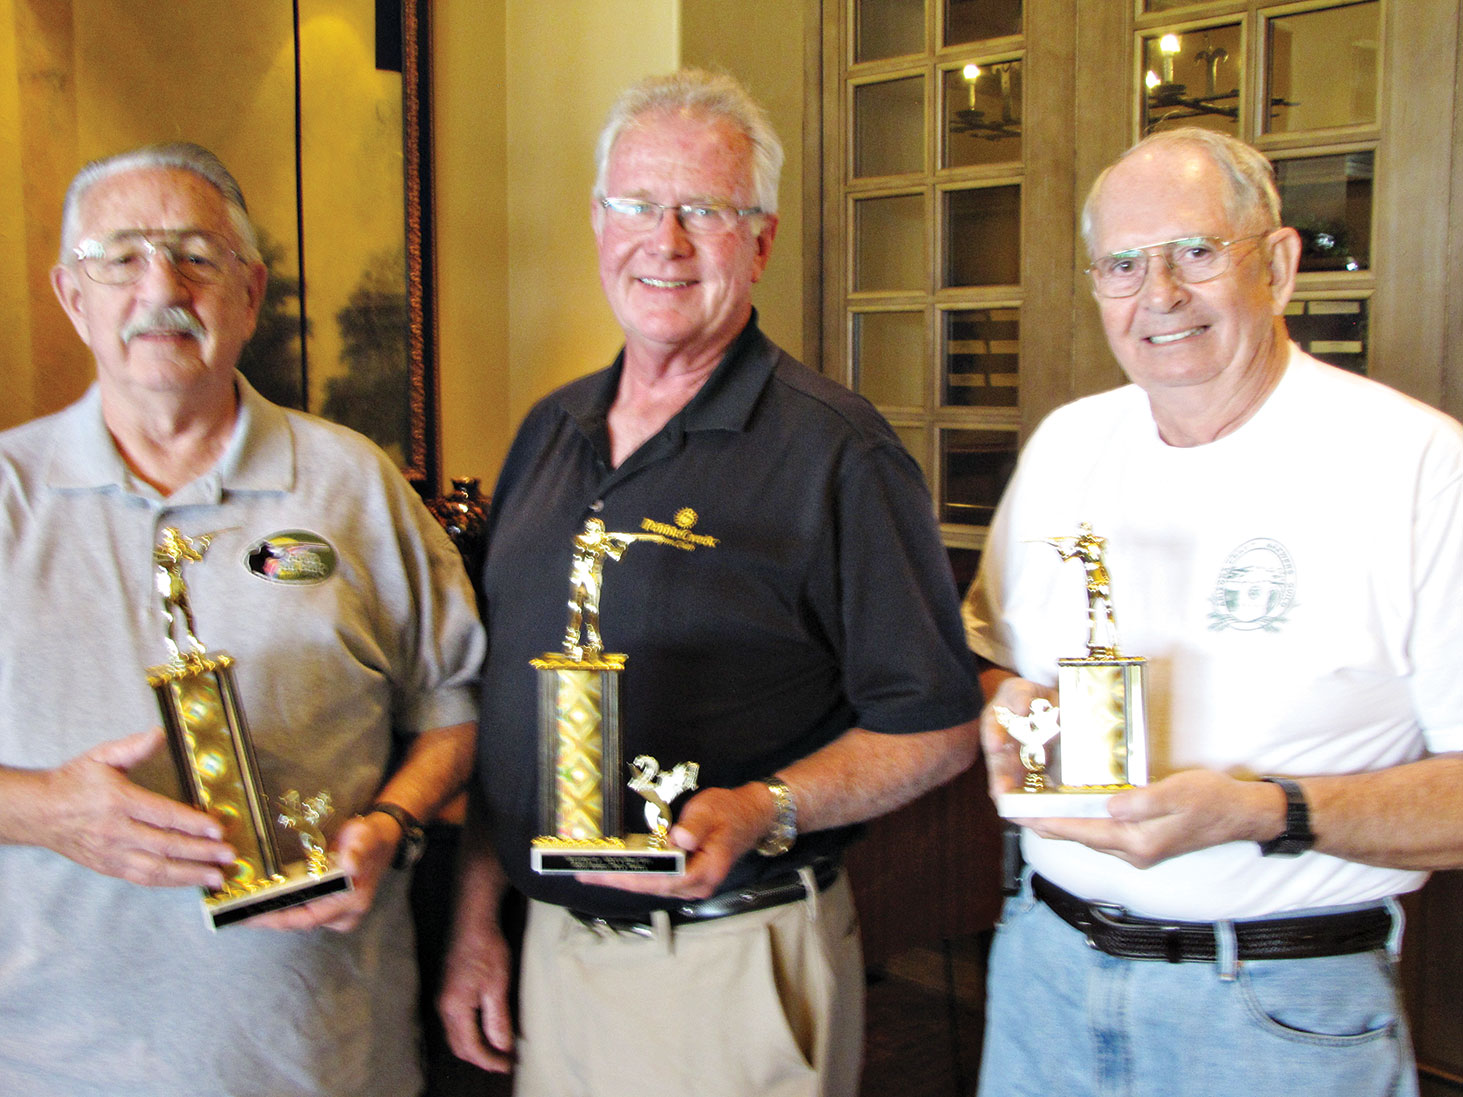 Top men shooters, left to right: Dennis Finn, Jim Pollock and Darwin Puls